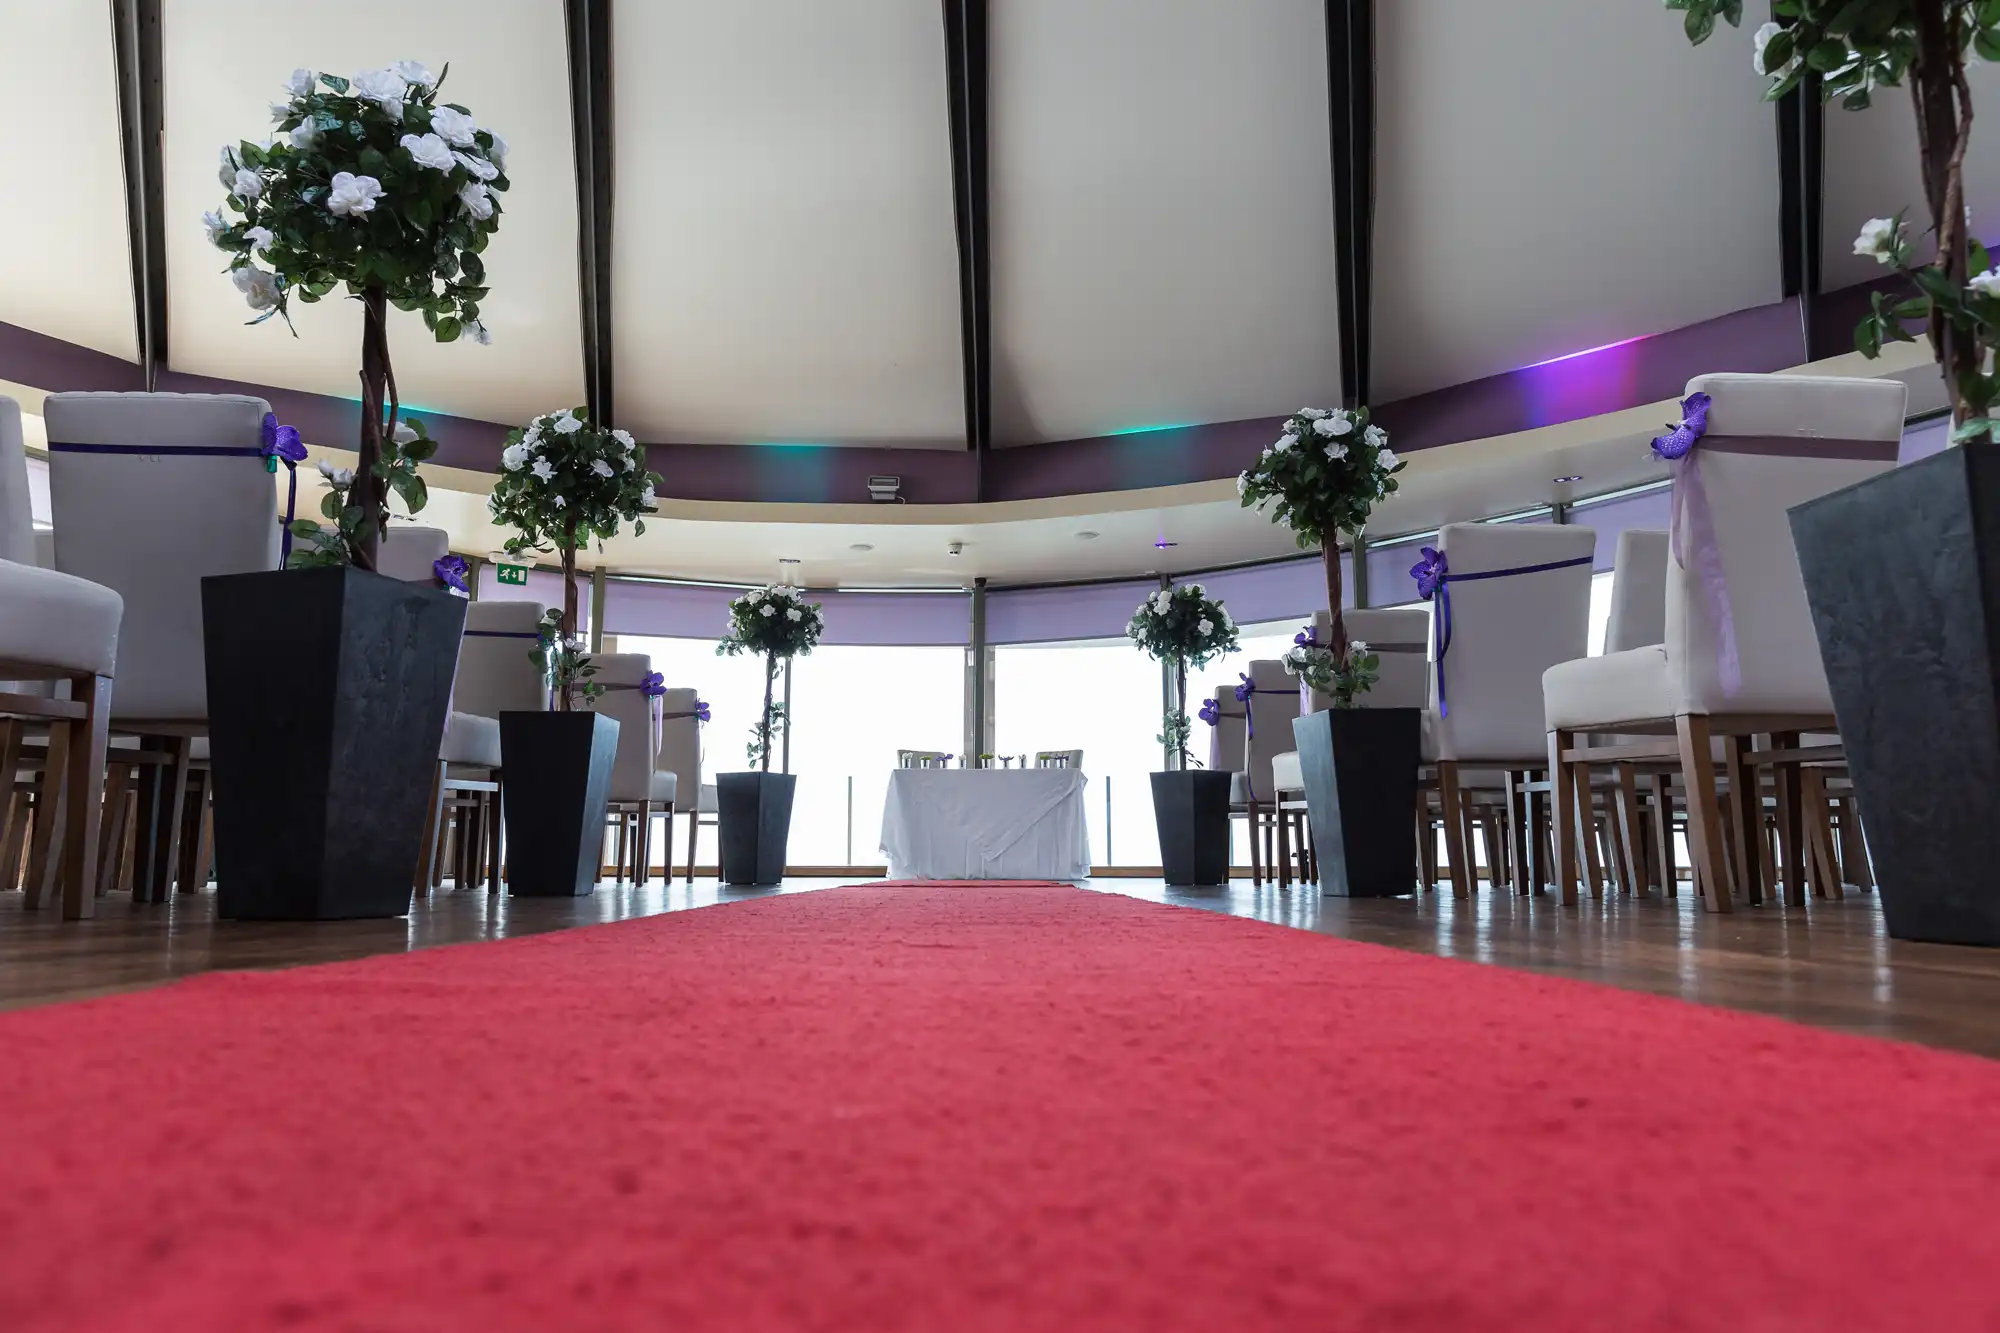 Interior of a wedding venue with red carpet aisle, white chairs adorned with purple ribbons, and floral decorations under soft lighting.